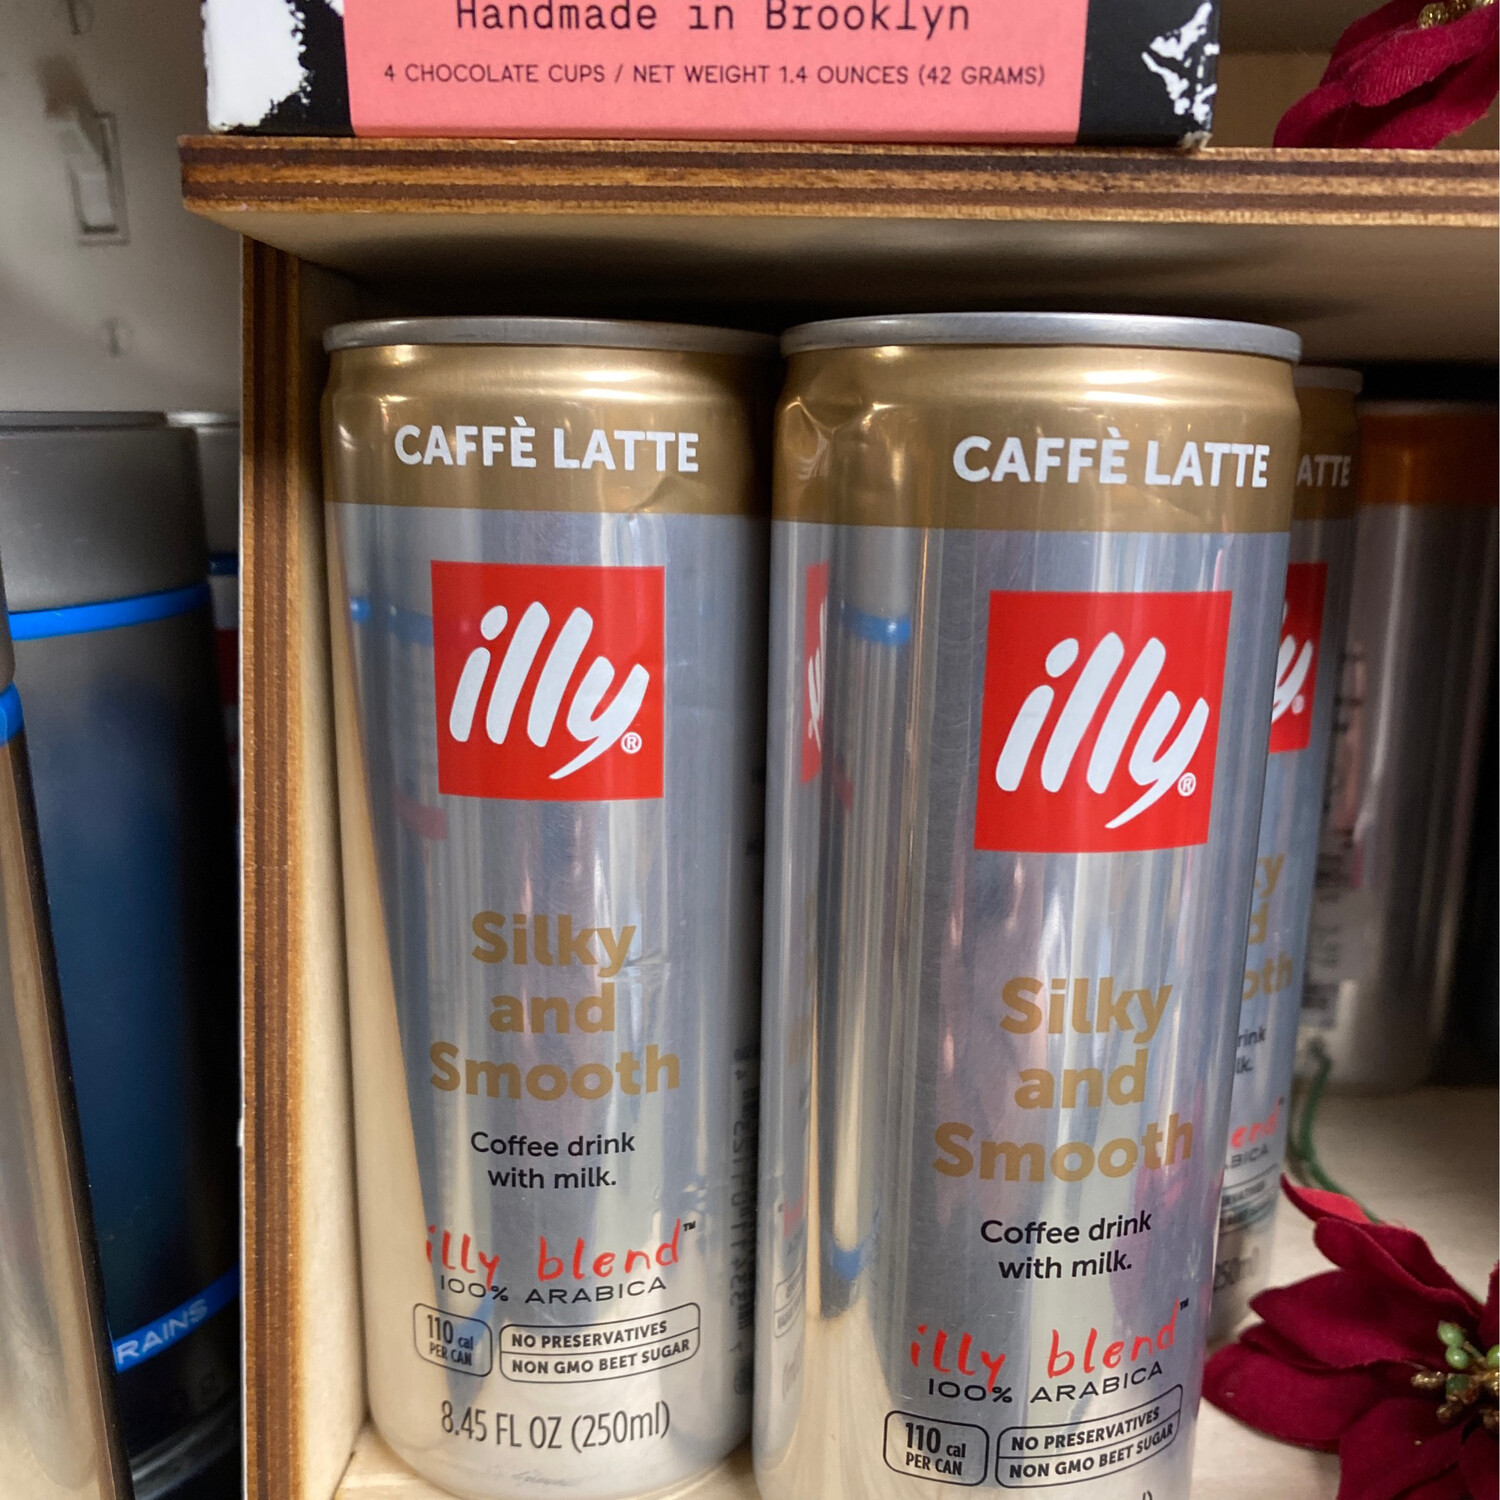 Illy Silky And Smooth Drink